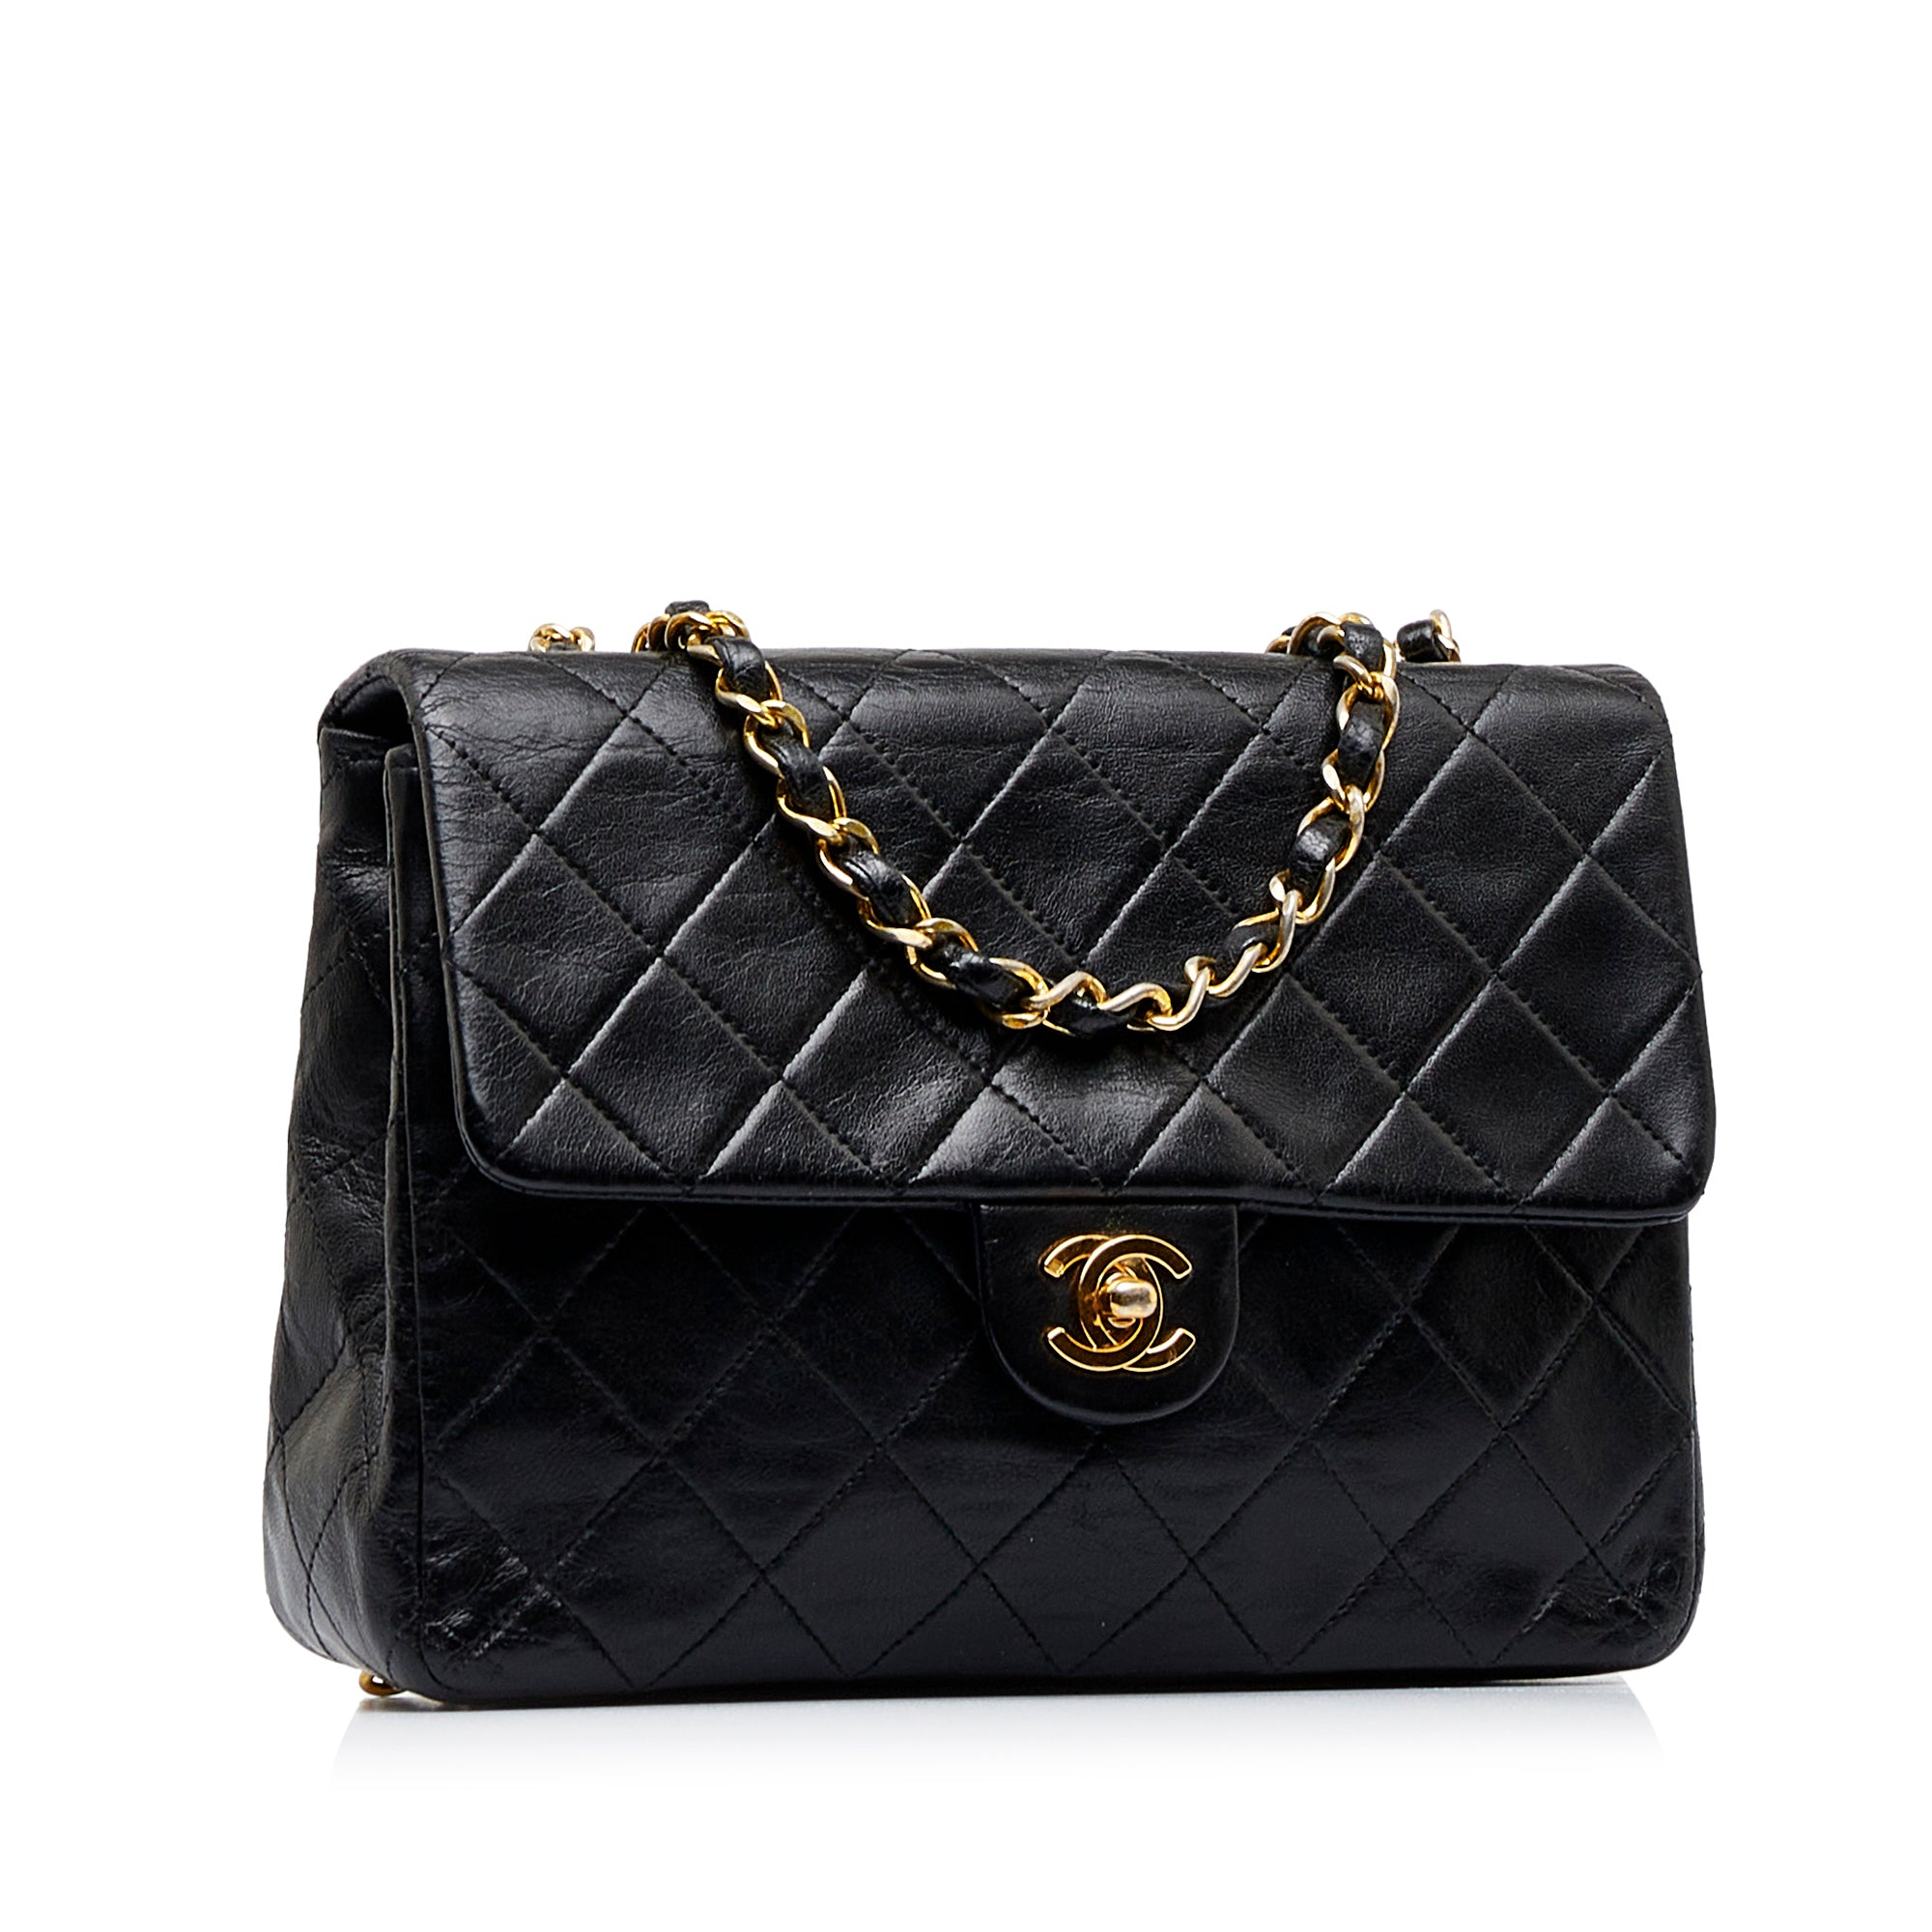 Chanel Black and Silver Lambskin Mini Classic Limited Edition